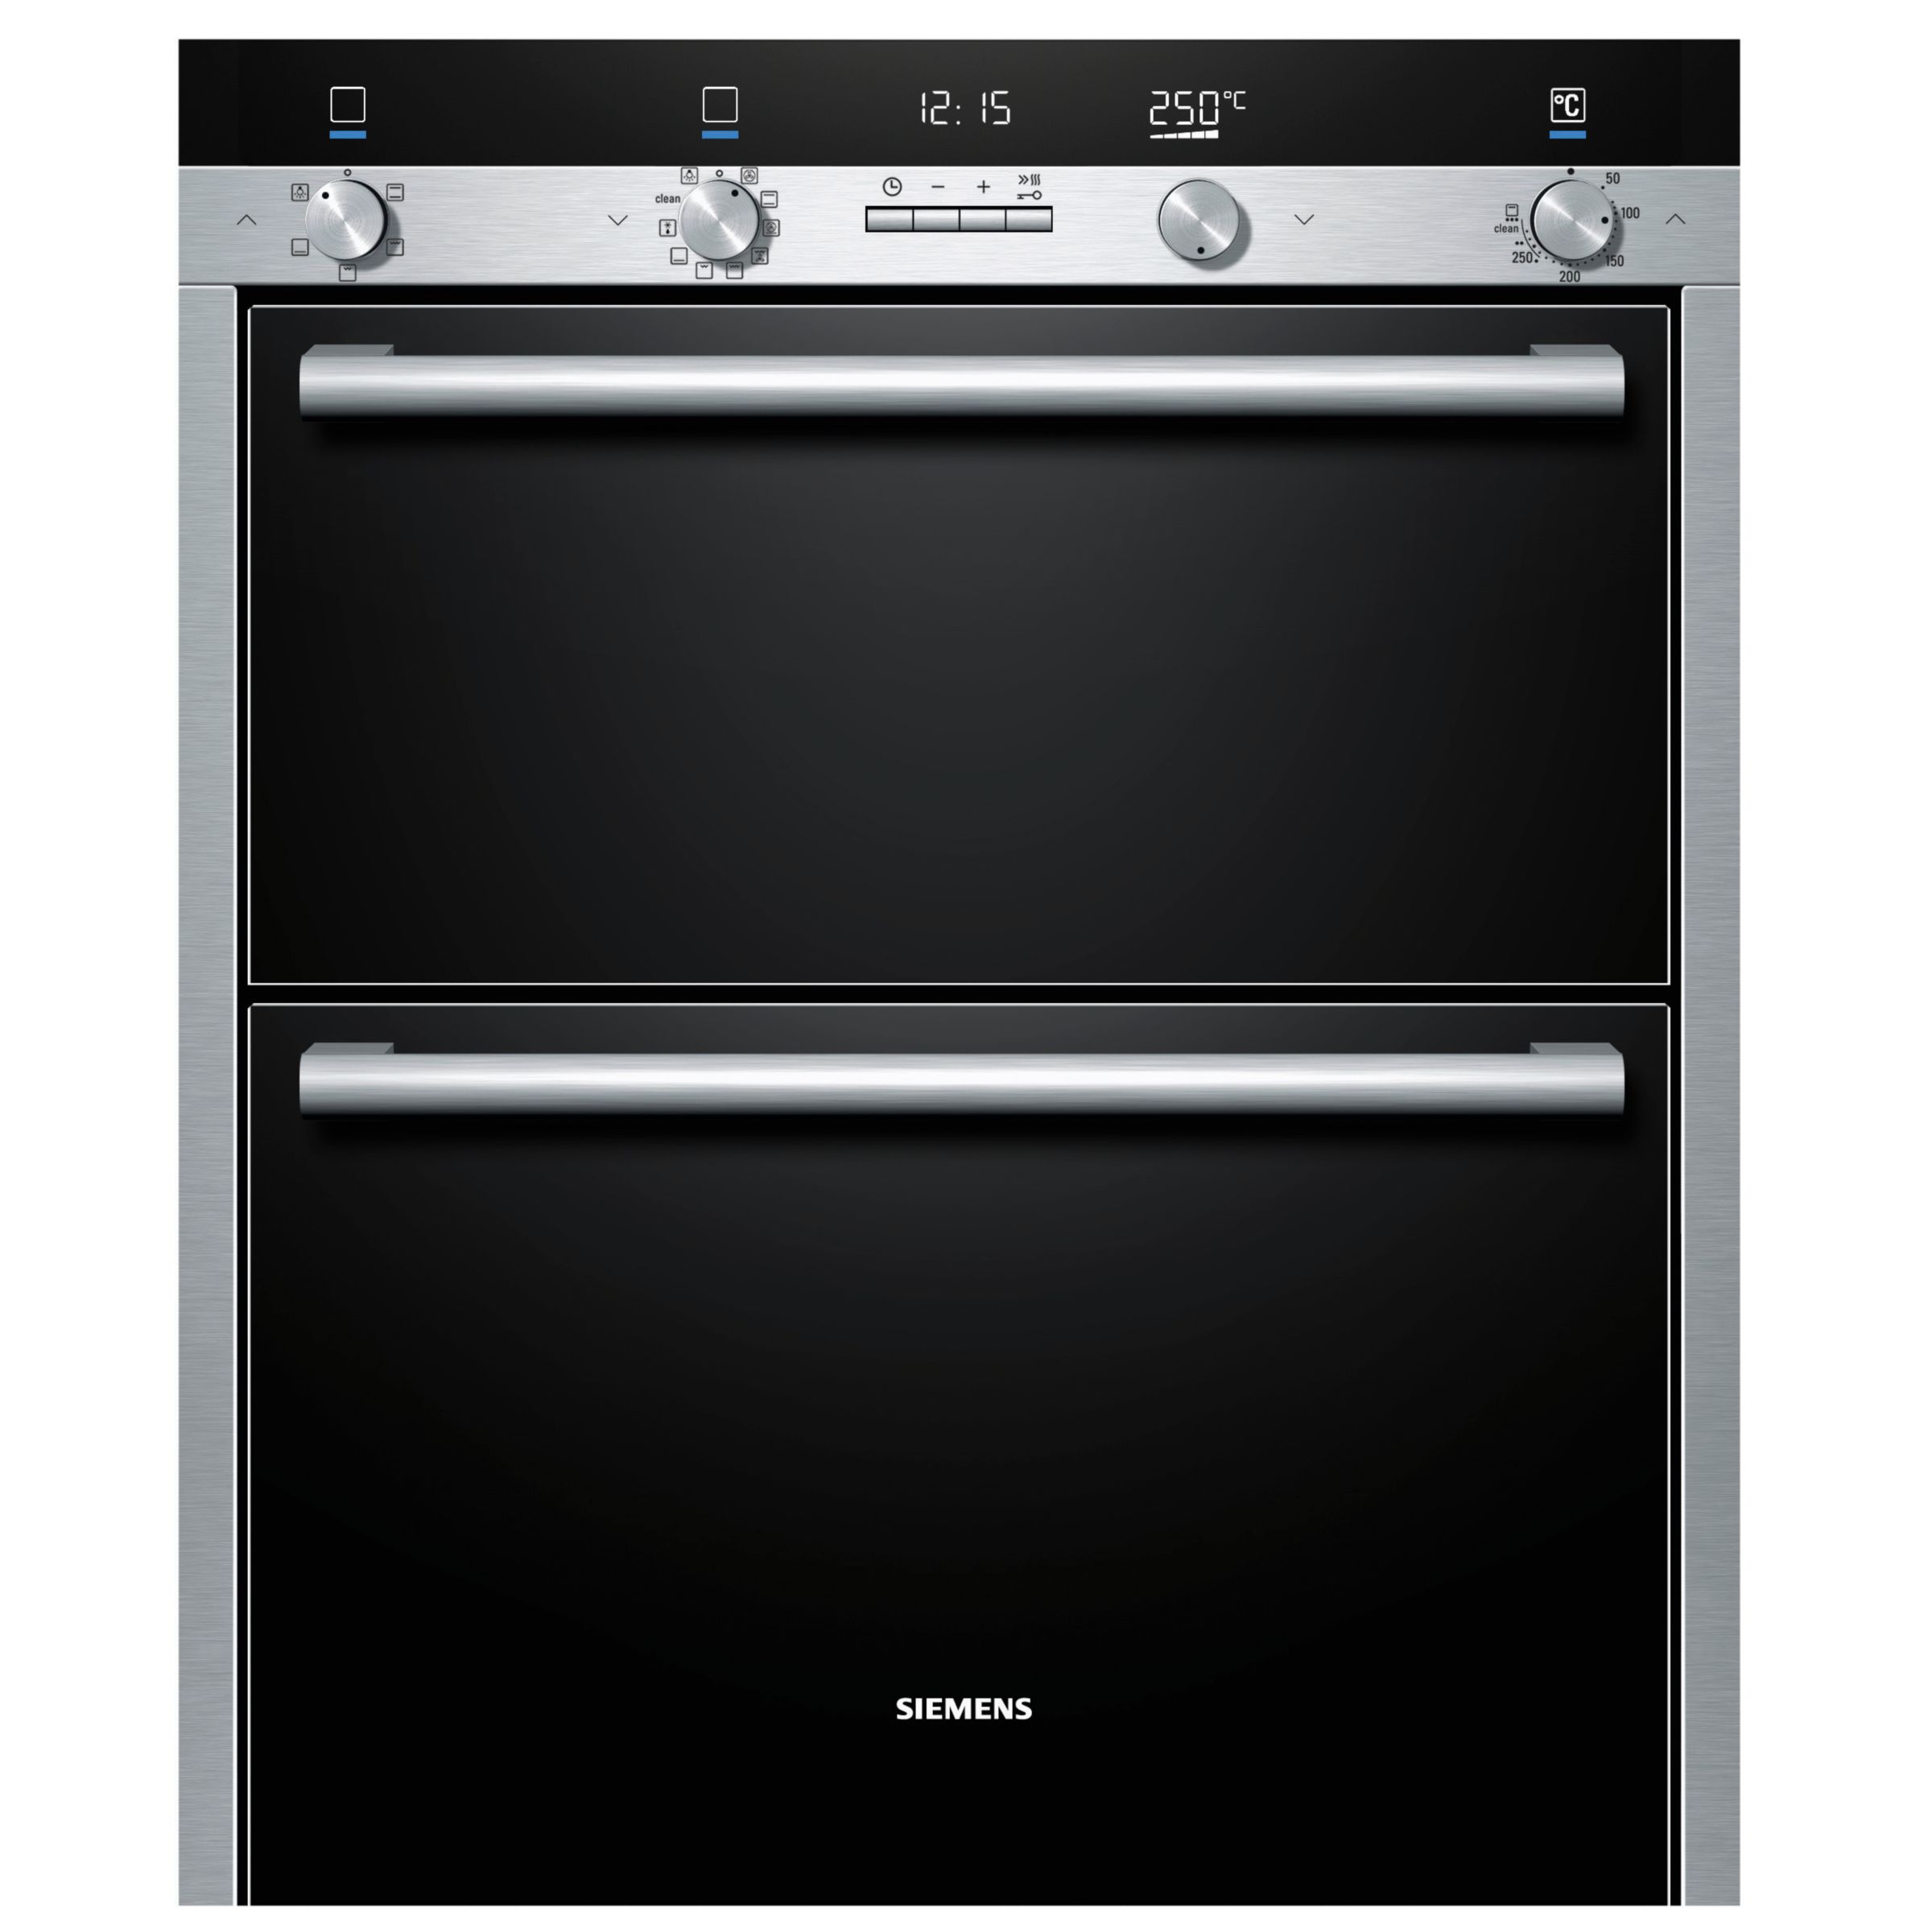 Siemens HB55NB550B Double Electric Oven, Stainless Steel at John Lewis